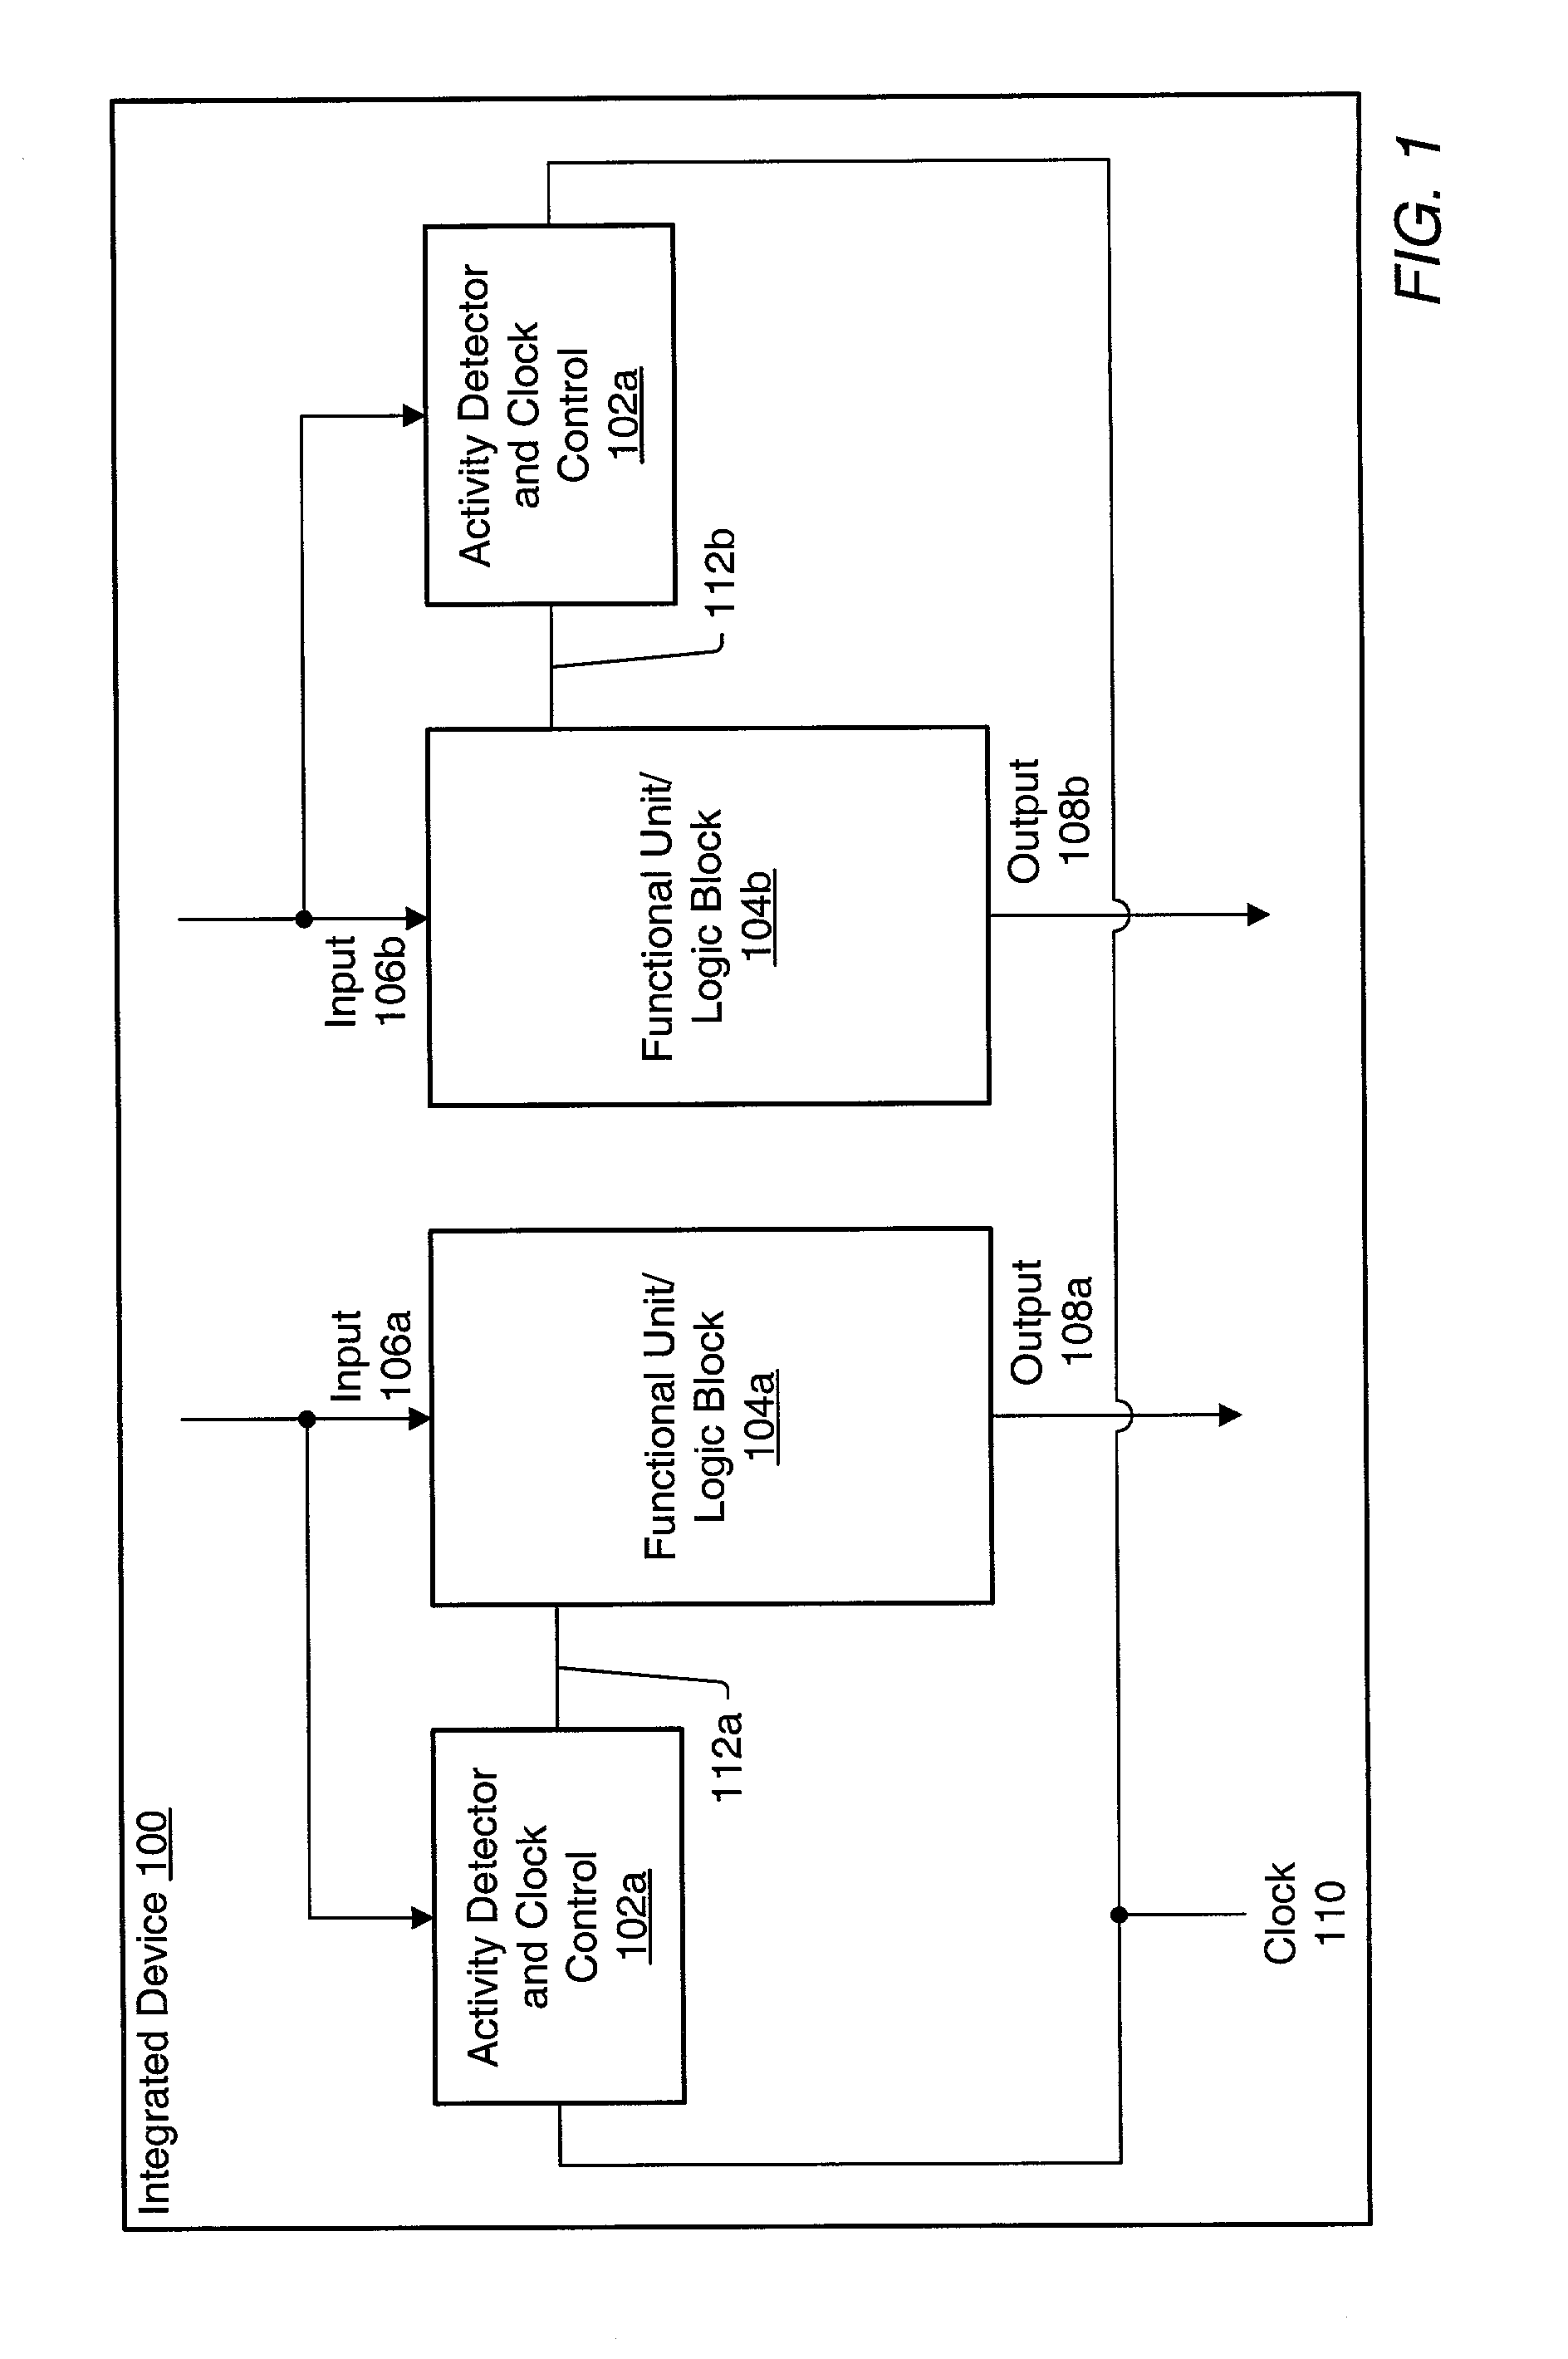 Clock control of functional units in an integrated circuit based on monitoring unit signals to predict inactivity